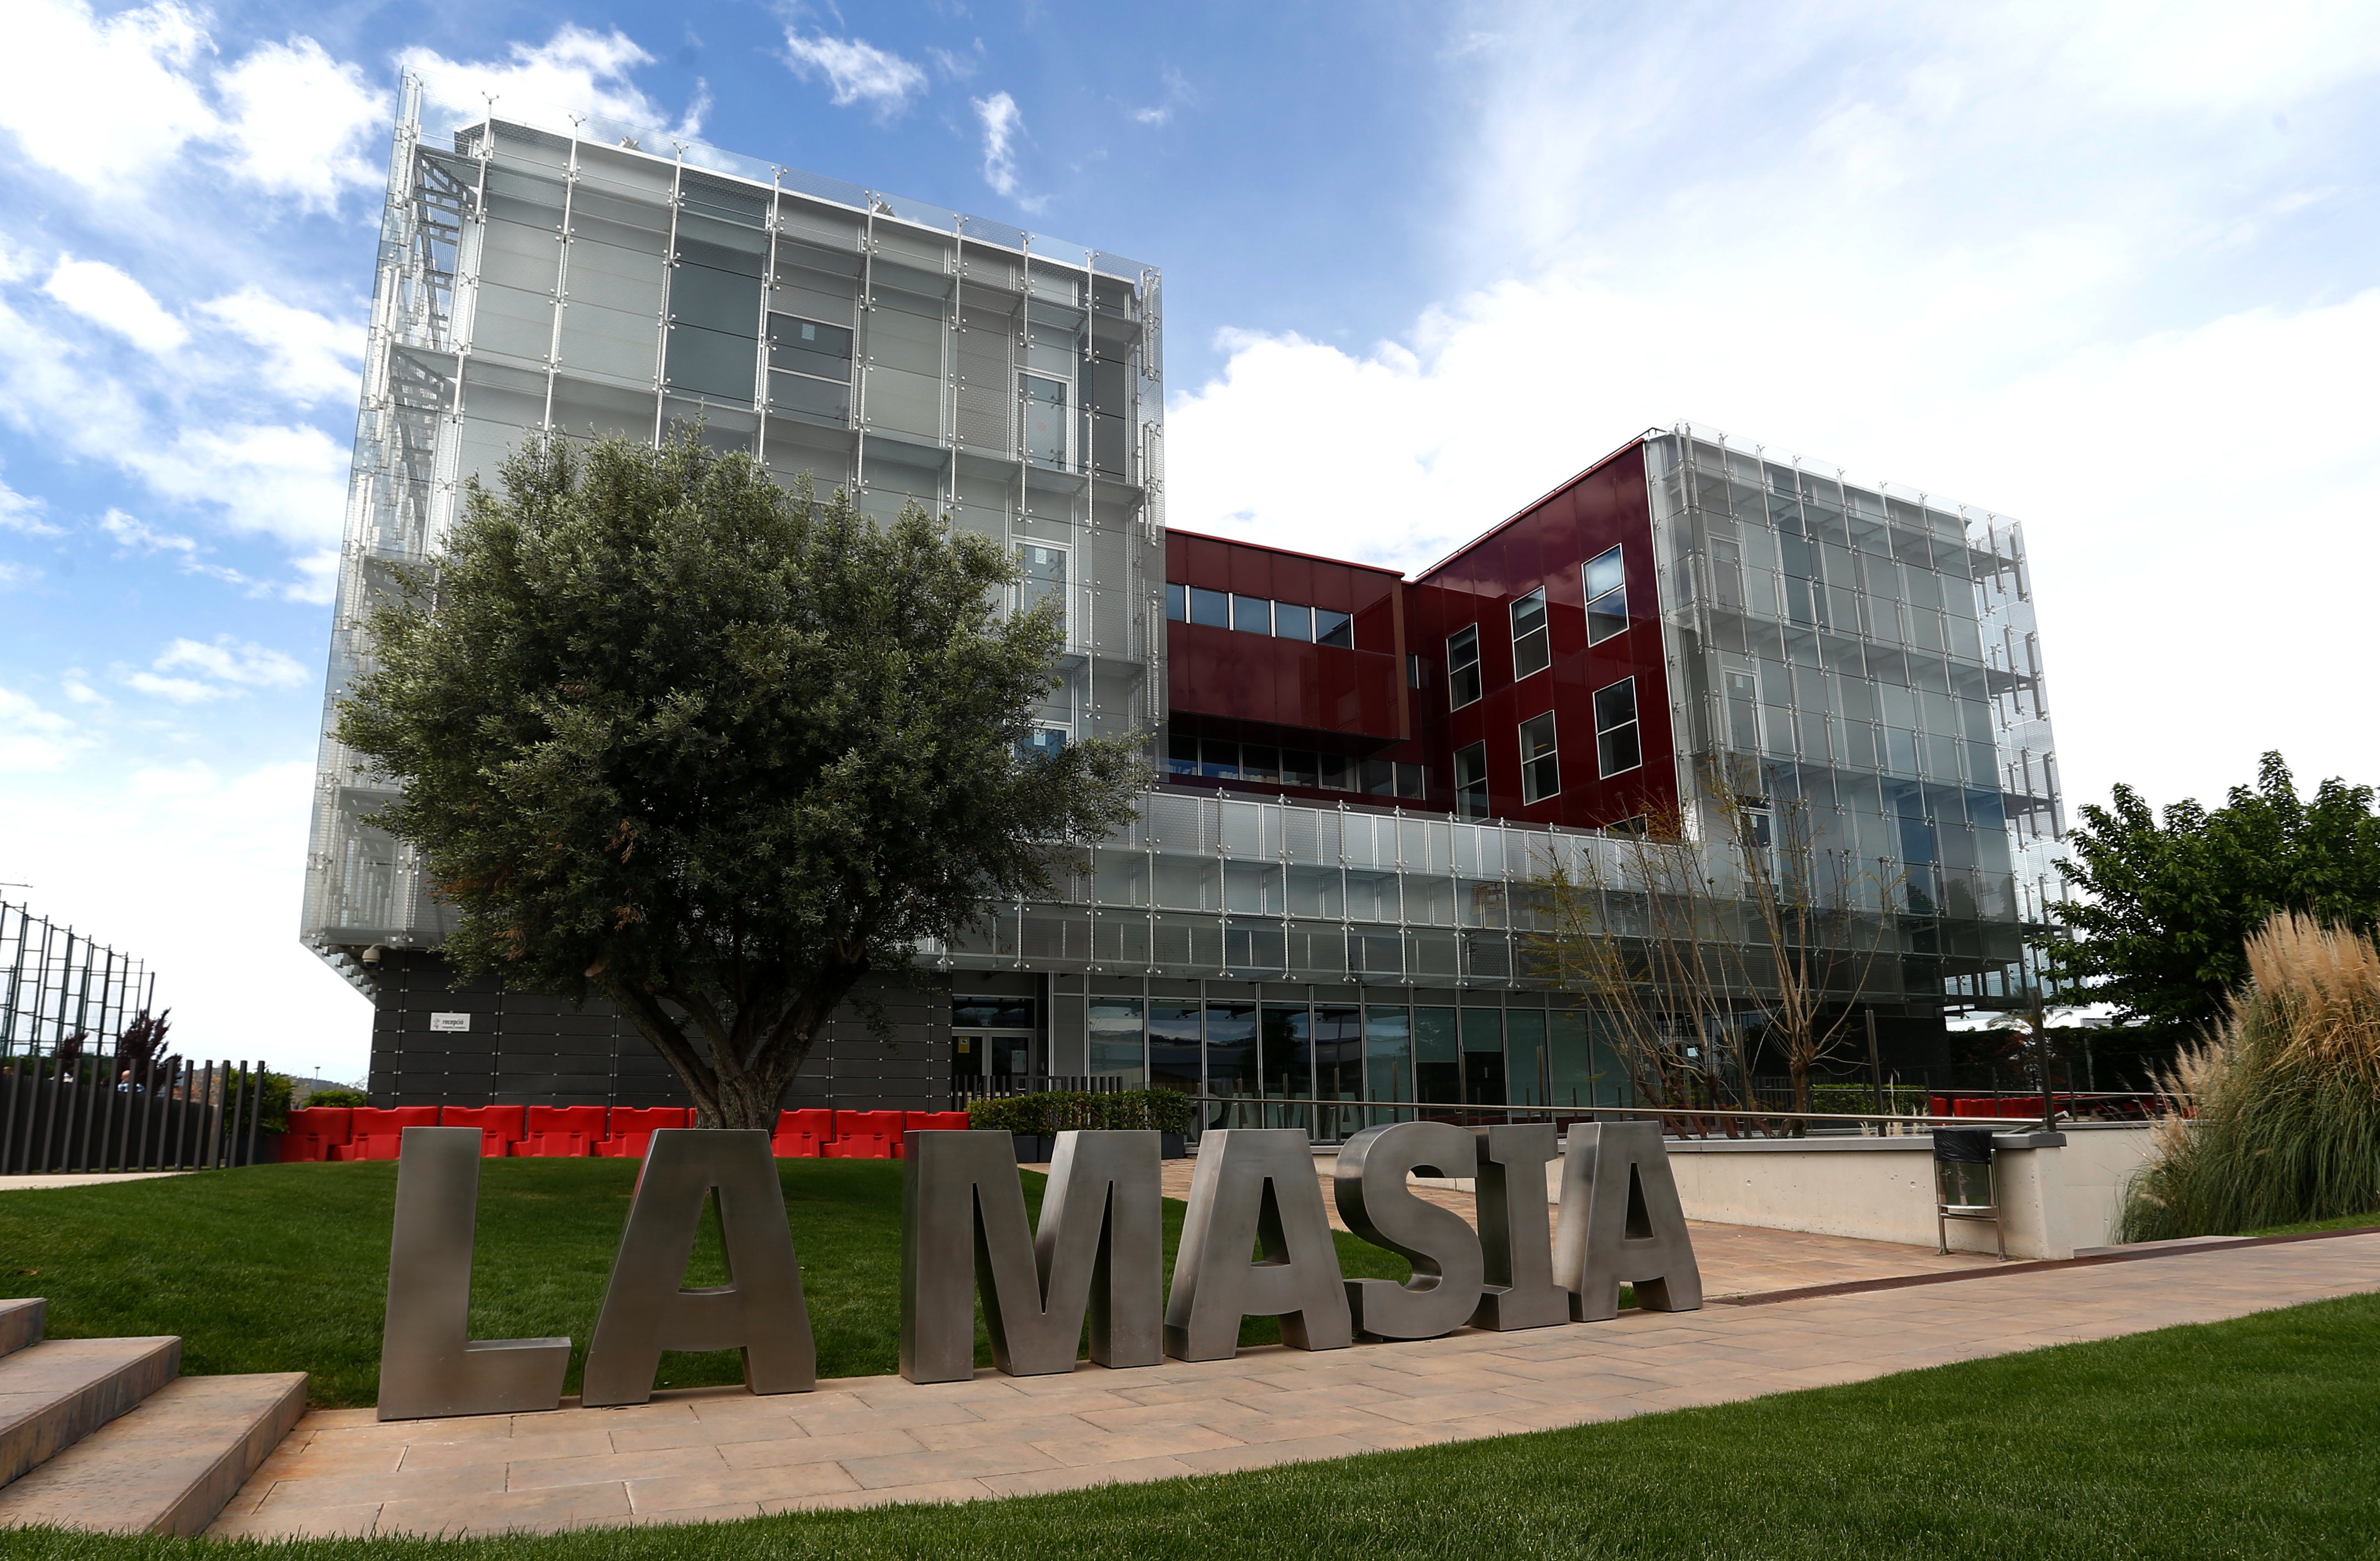 PHOTOS: All you need to know about La Masia, FC Barcelona’s famous academy